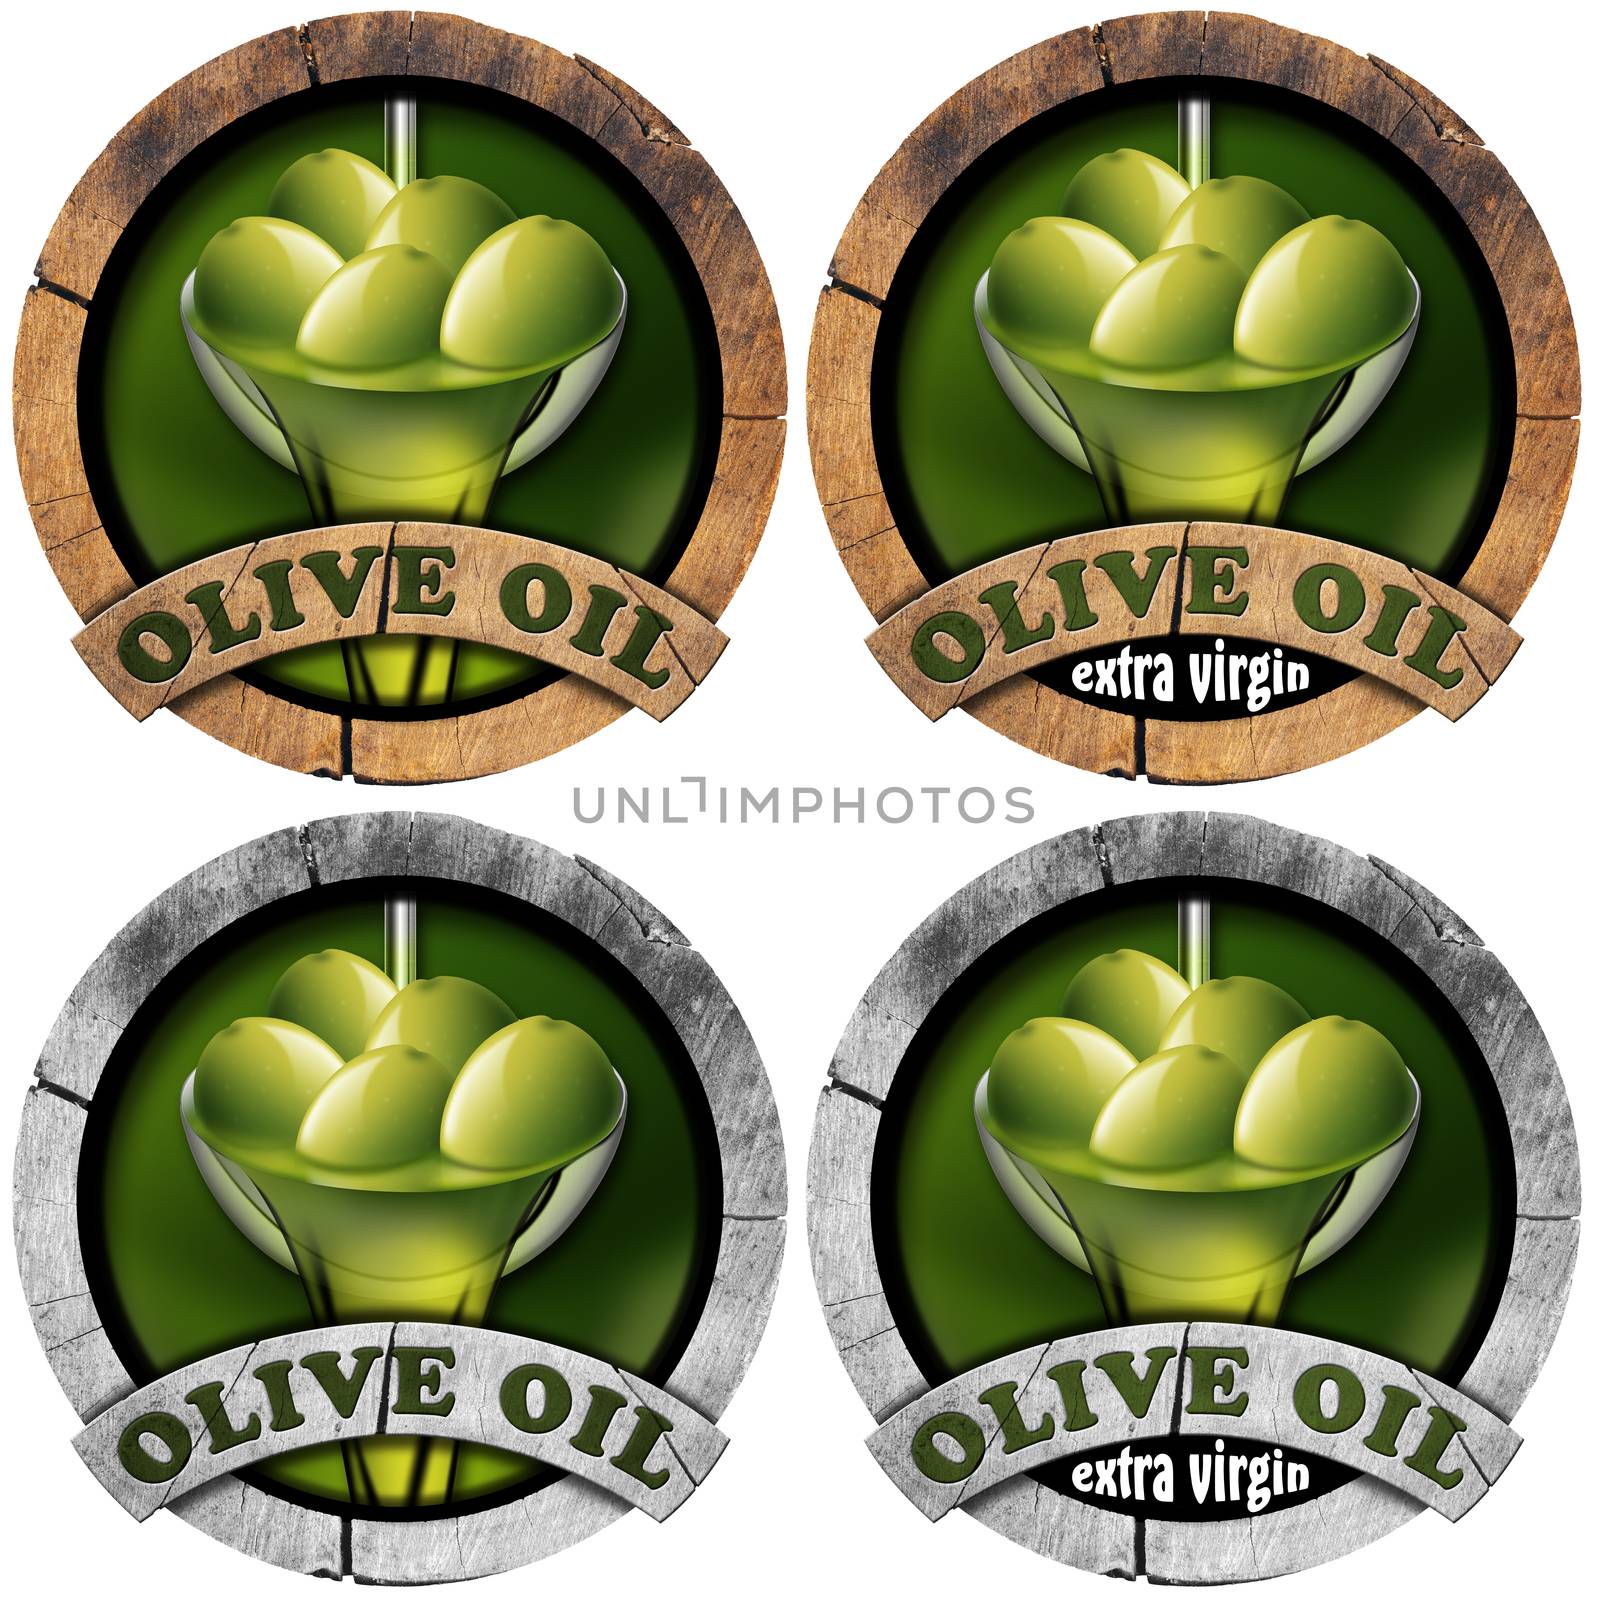 Collections of wooden icons or symbol with green olives and oil, text Olive oil and Extra virgin. Isolated on white background